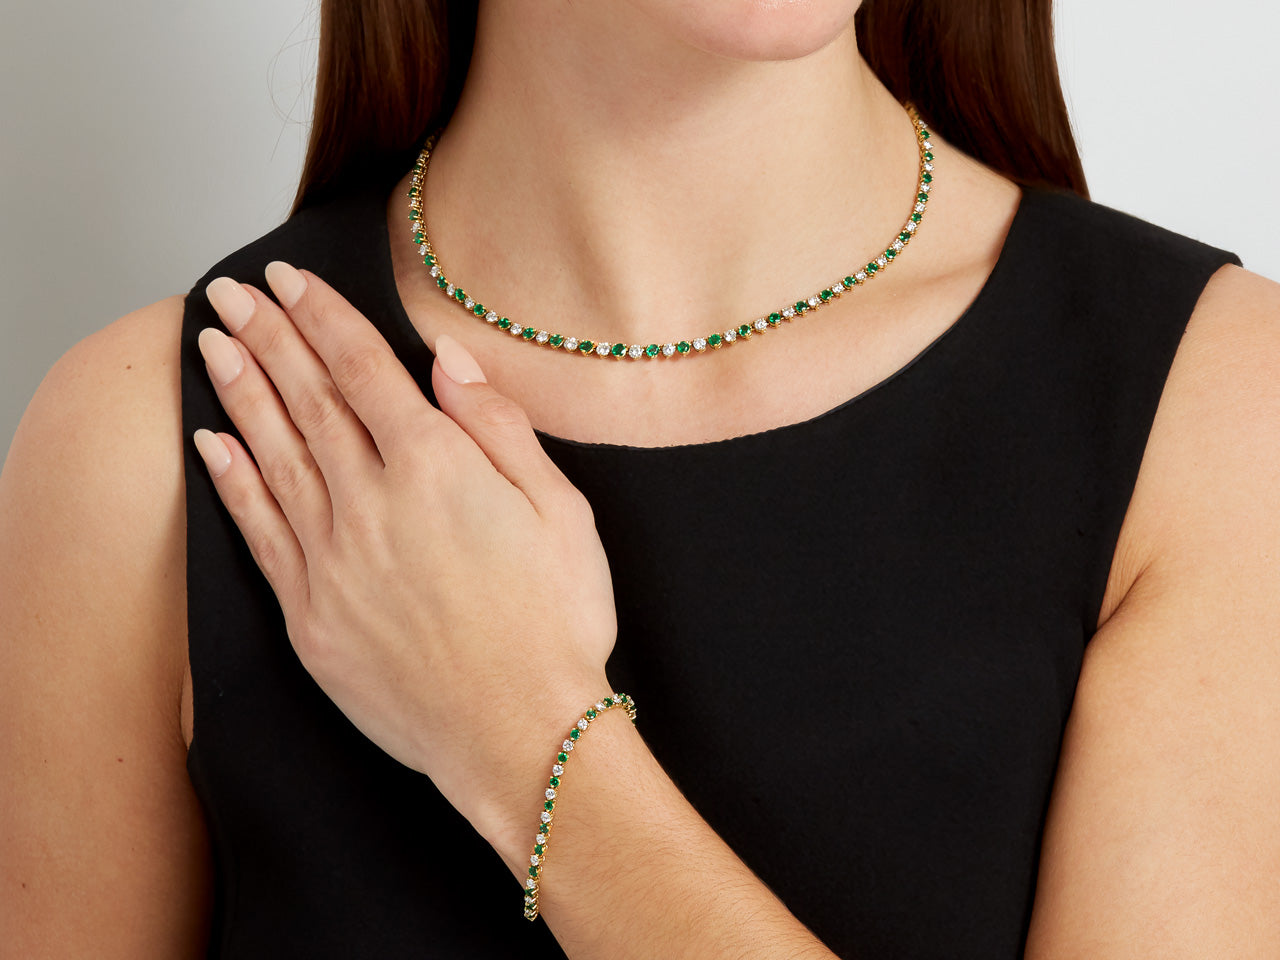 Emerald and Diamond Necklace and Bracelet in 18K Gold, by Black Starr & Frost